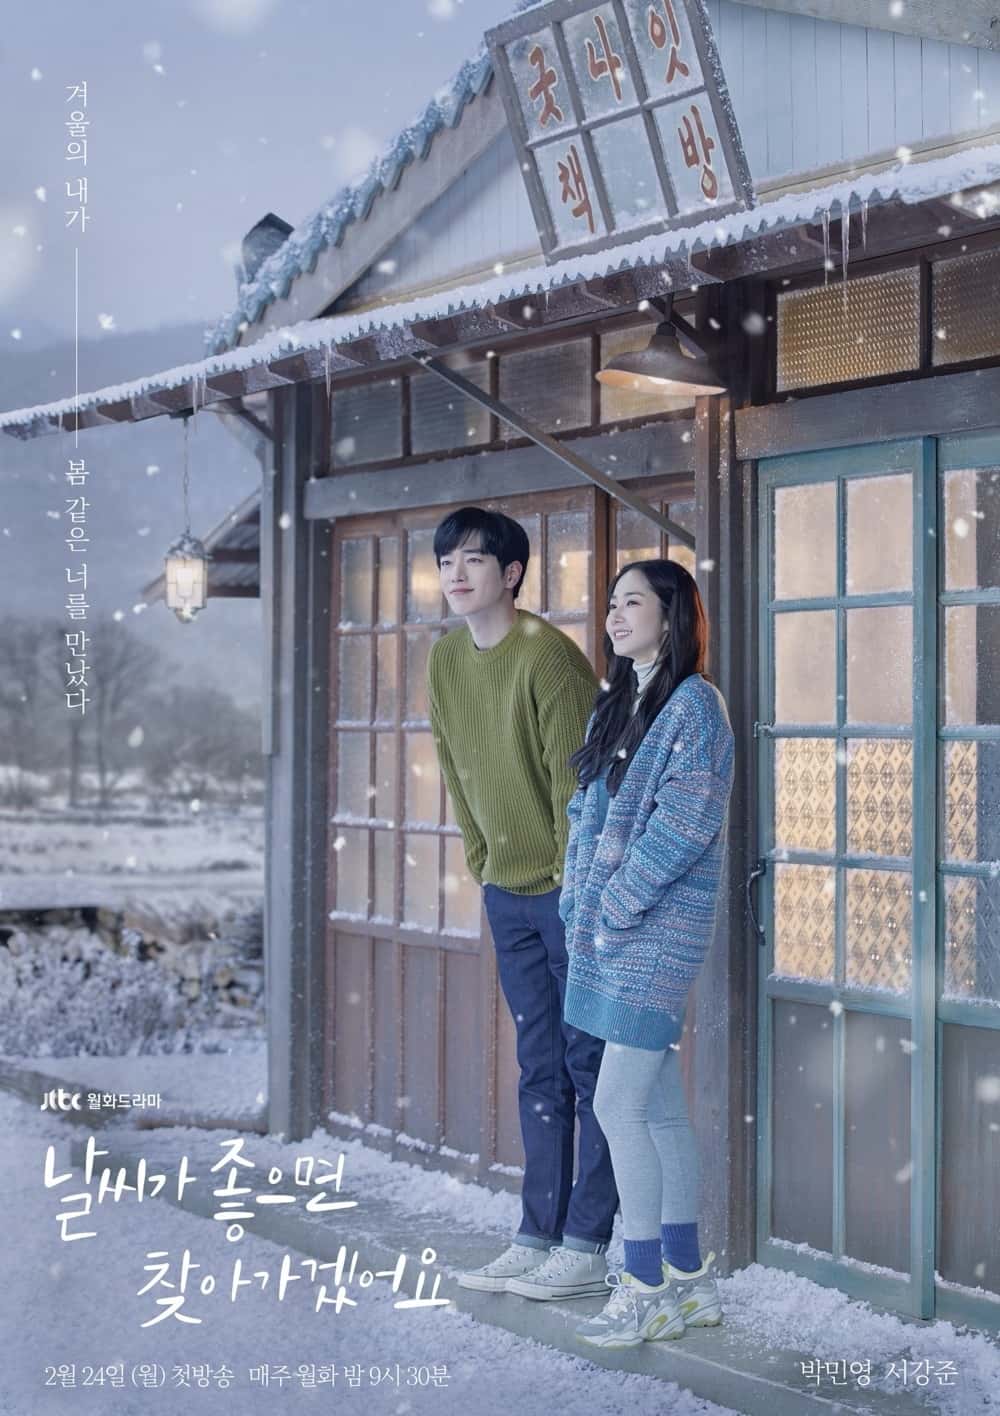 Sinopsis If The Weather Is Good, I’ll Find You Episode 1 - 16 Lengkap